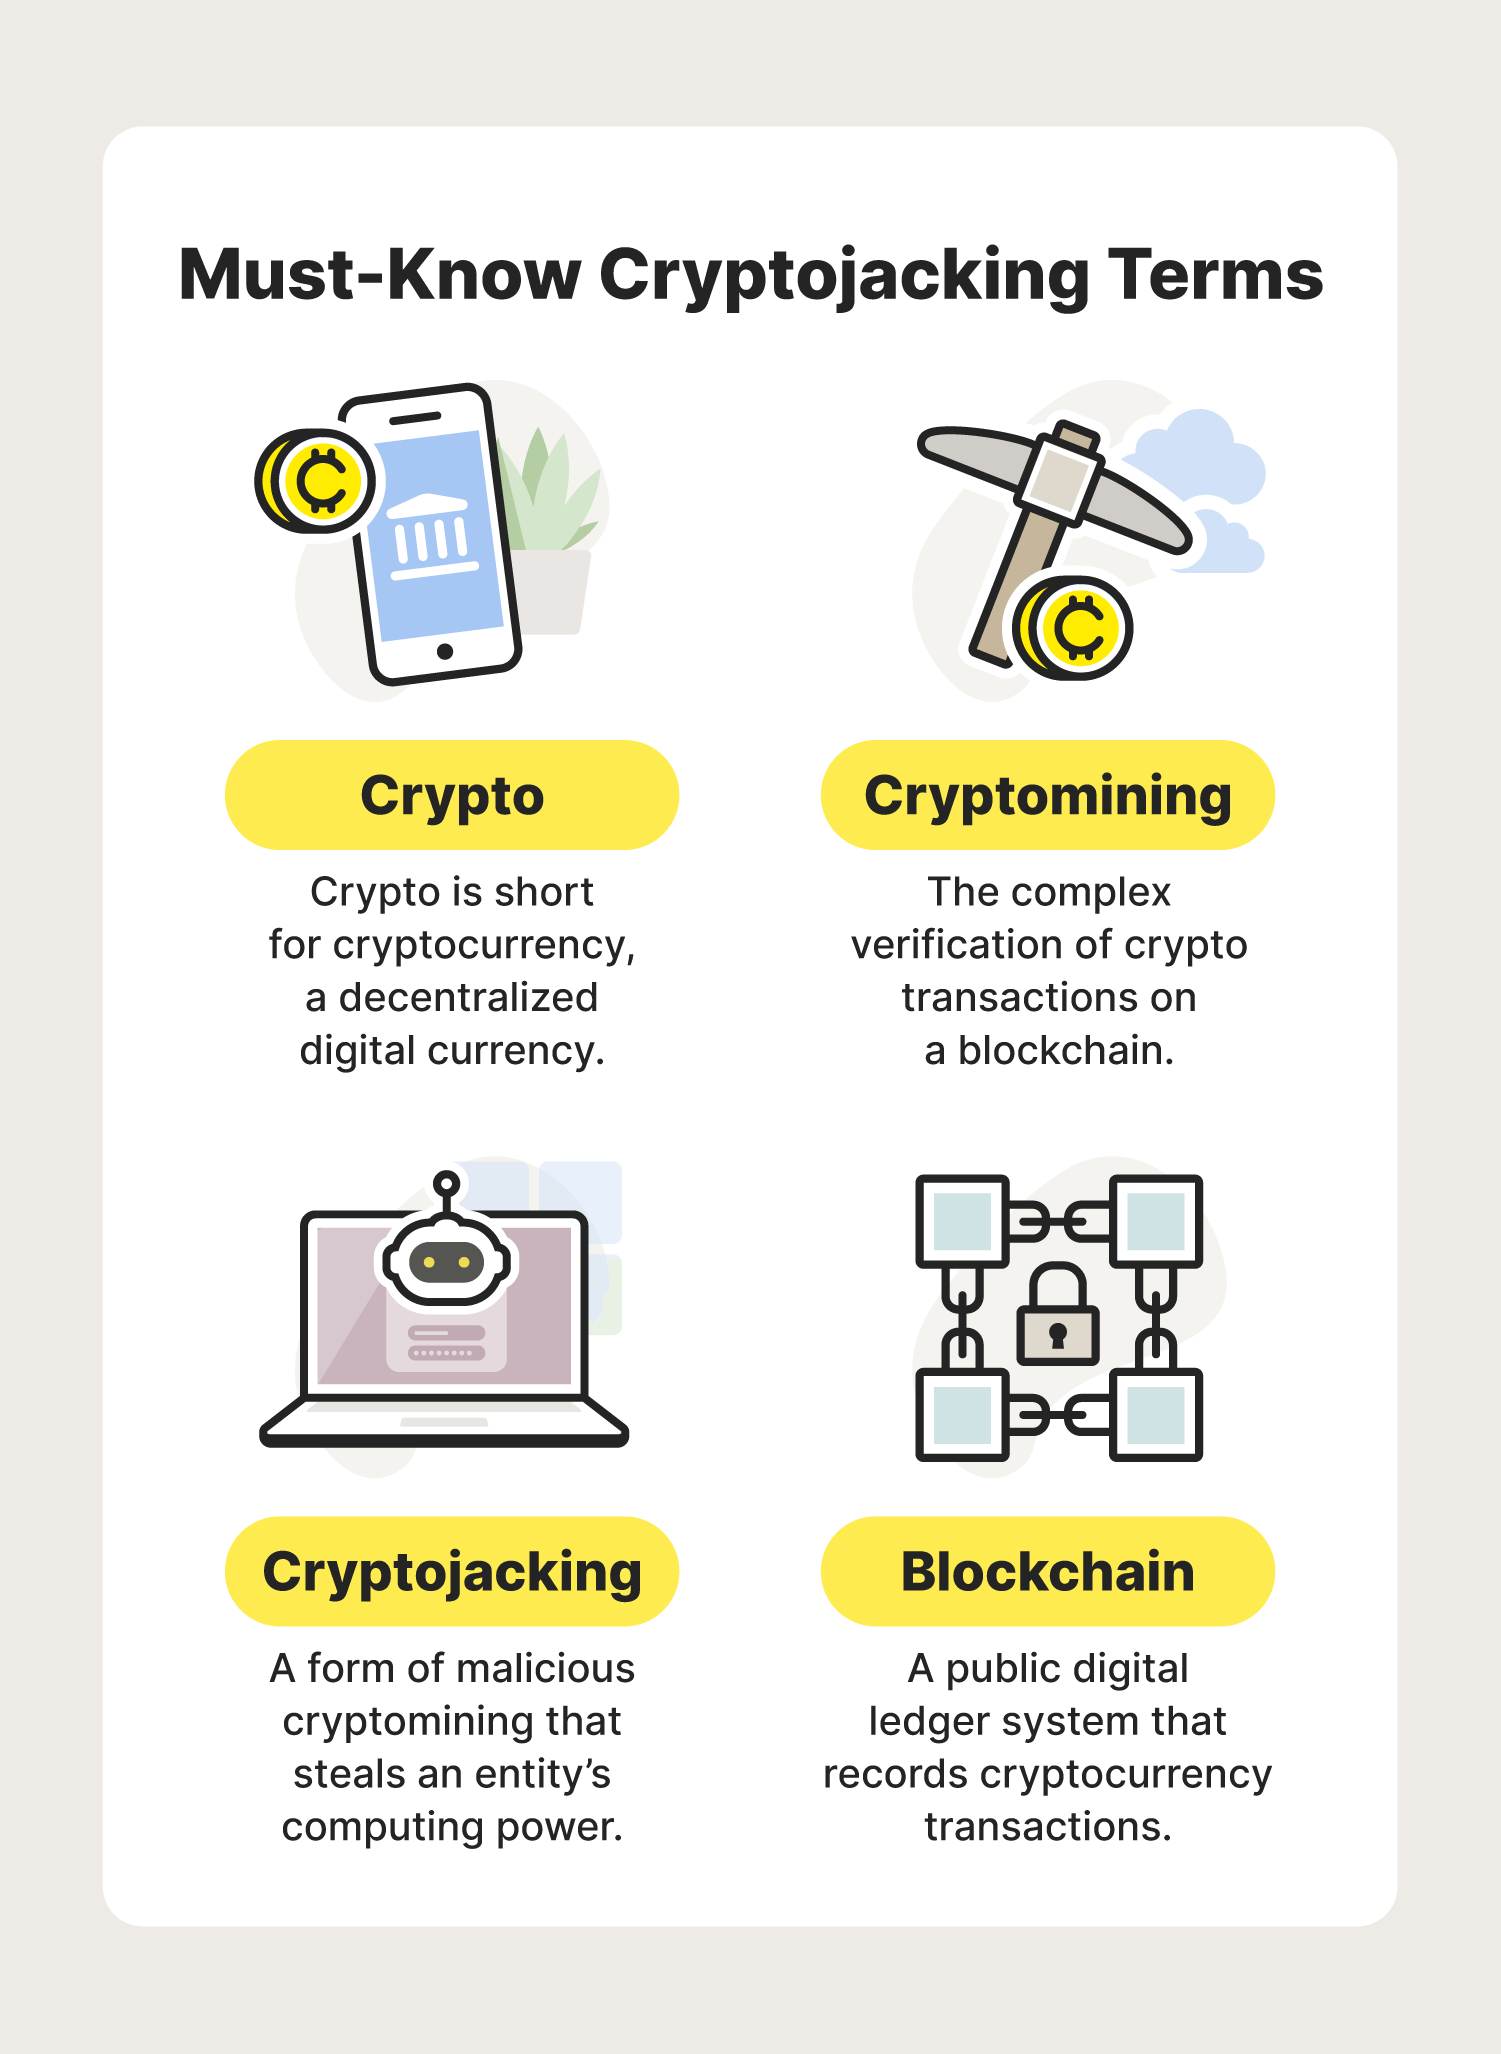 A graphic showcasing must-know cryptojacking terms including crypto, cryptomining, cryptojacking and blockchain.